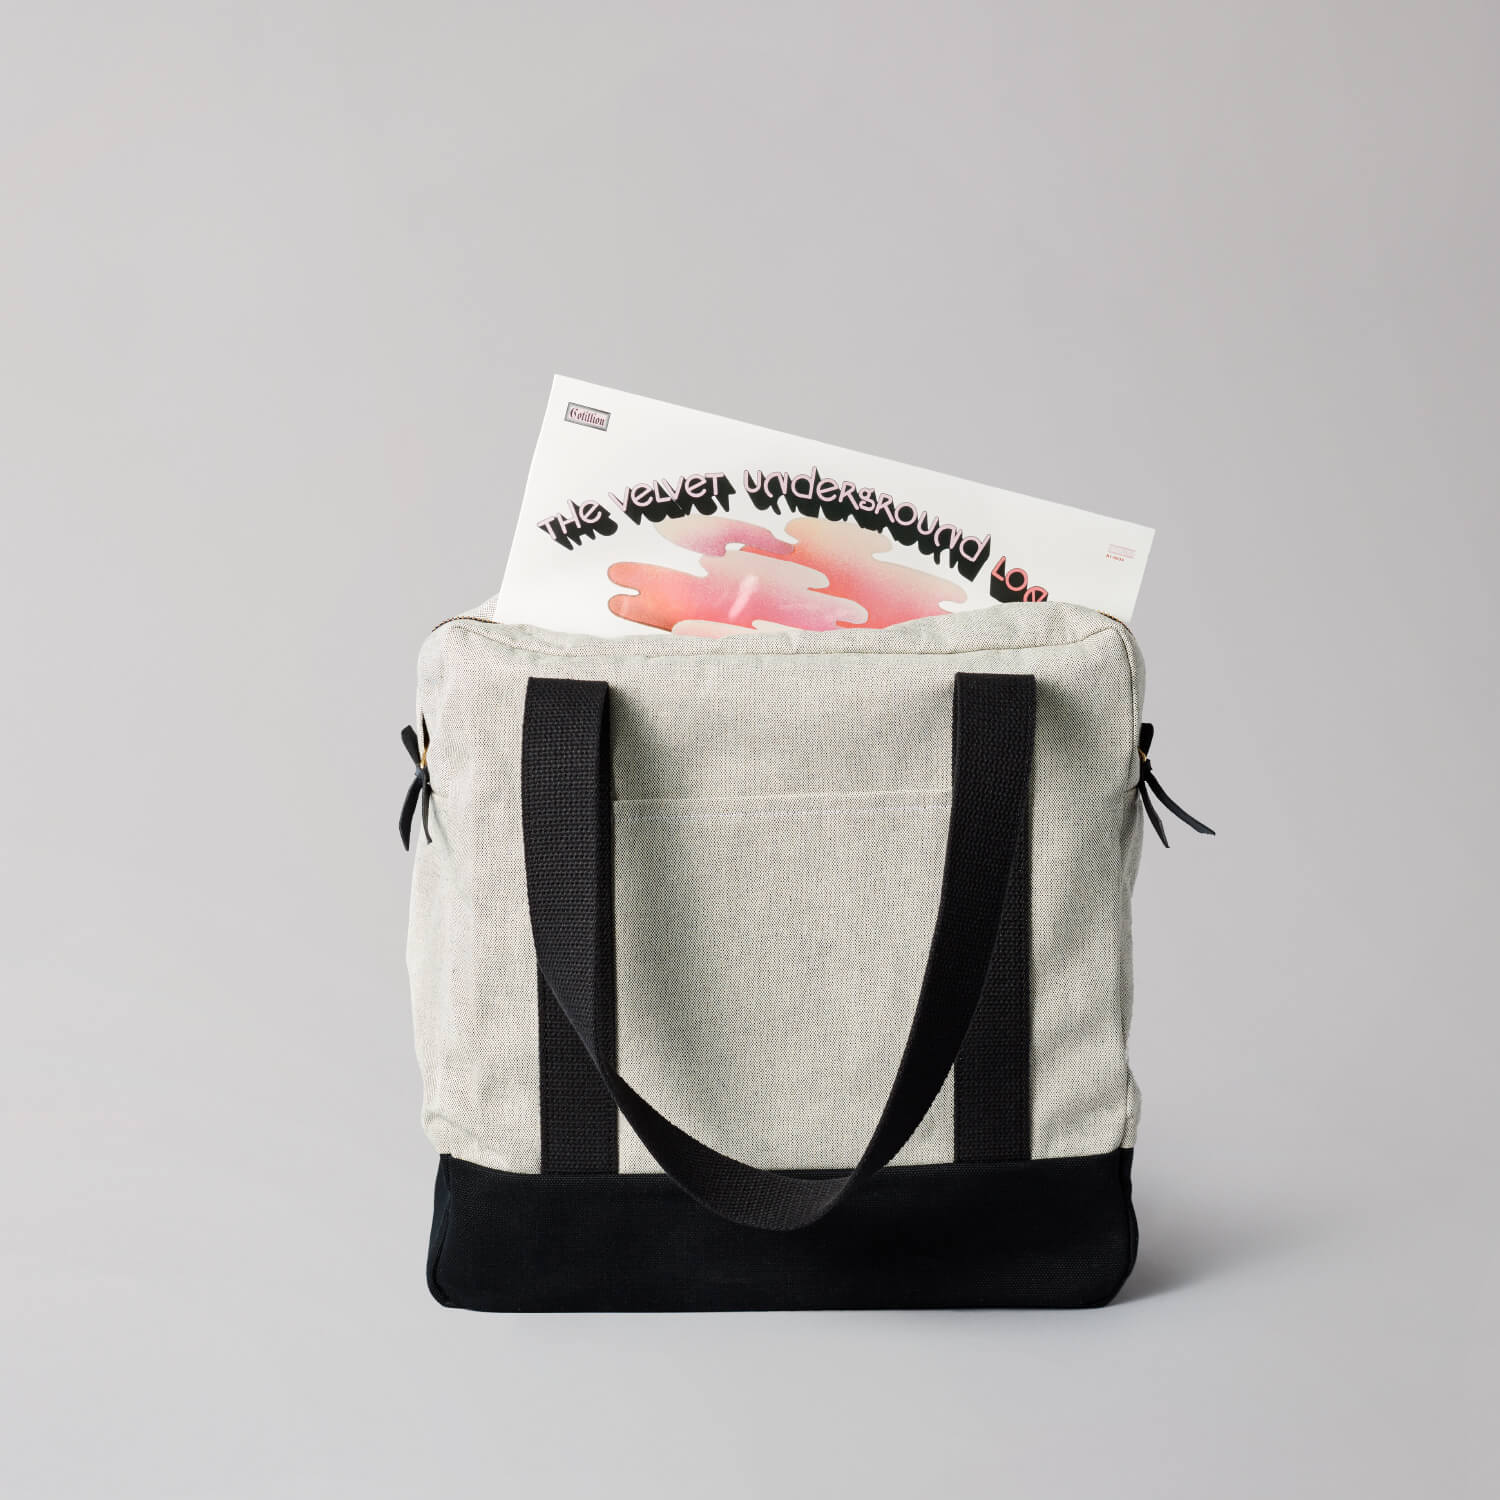 Vinyl Record tote bag, the ultimate must-have for record